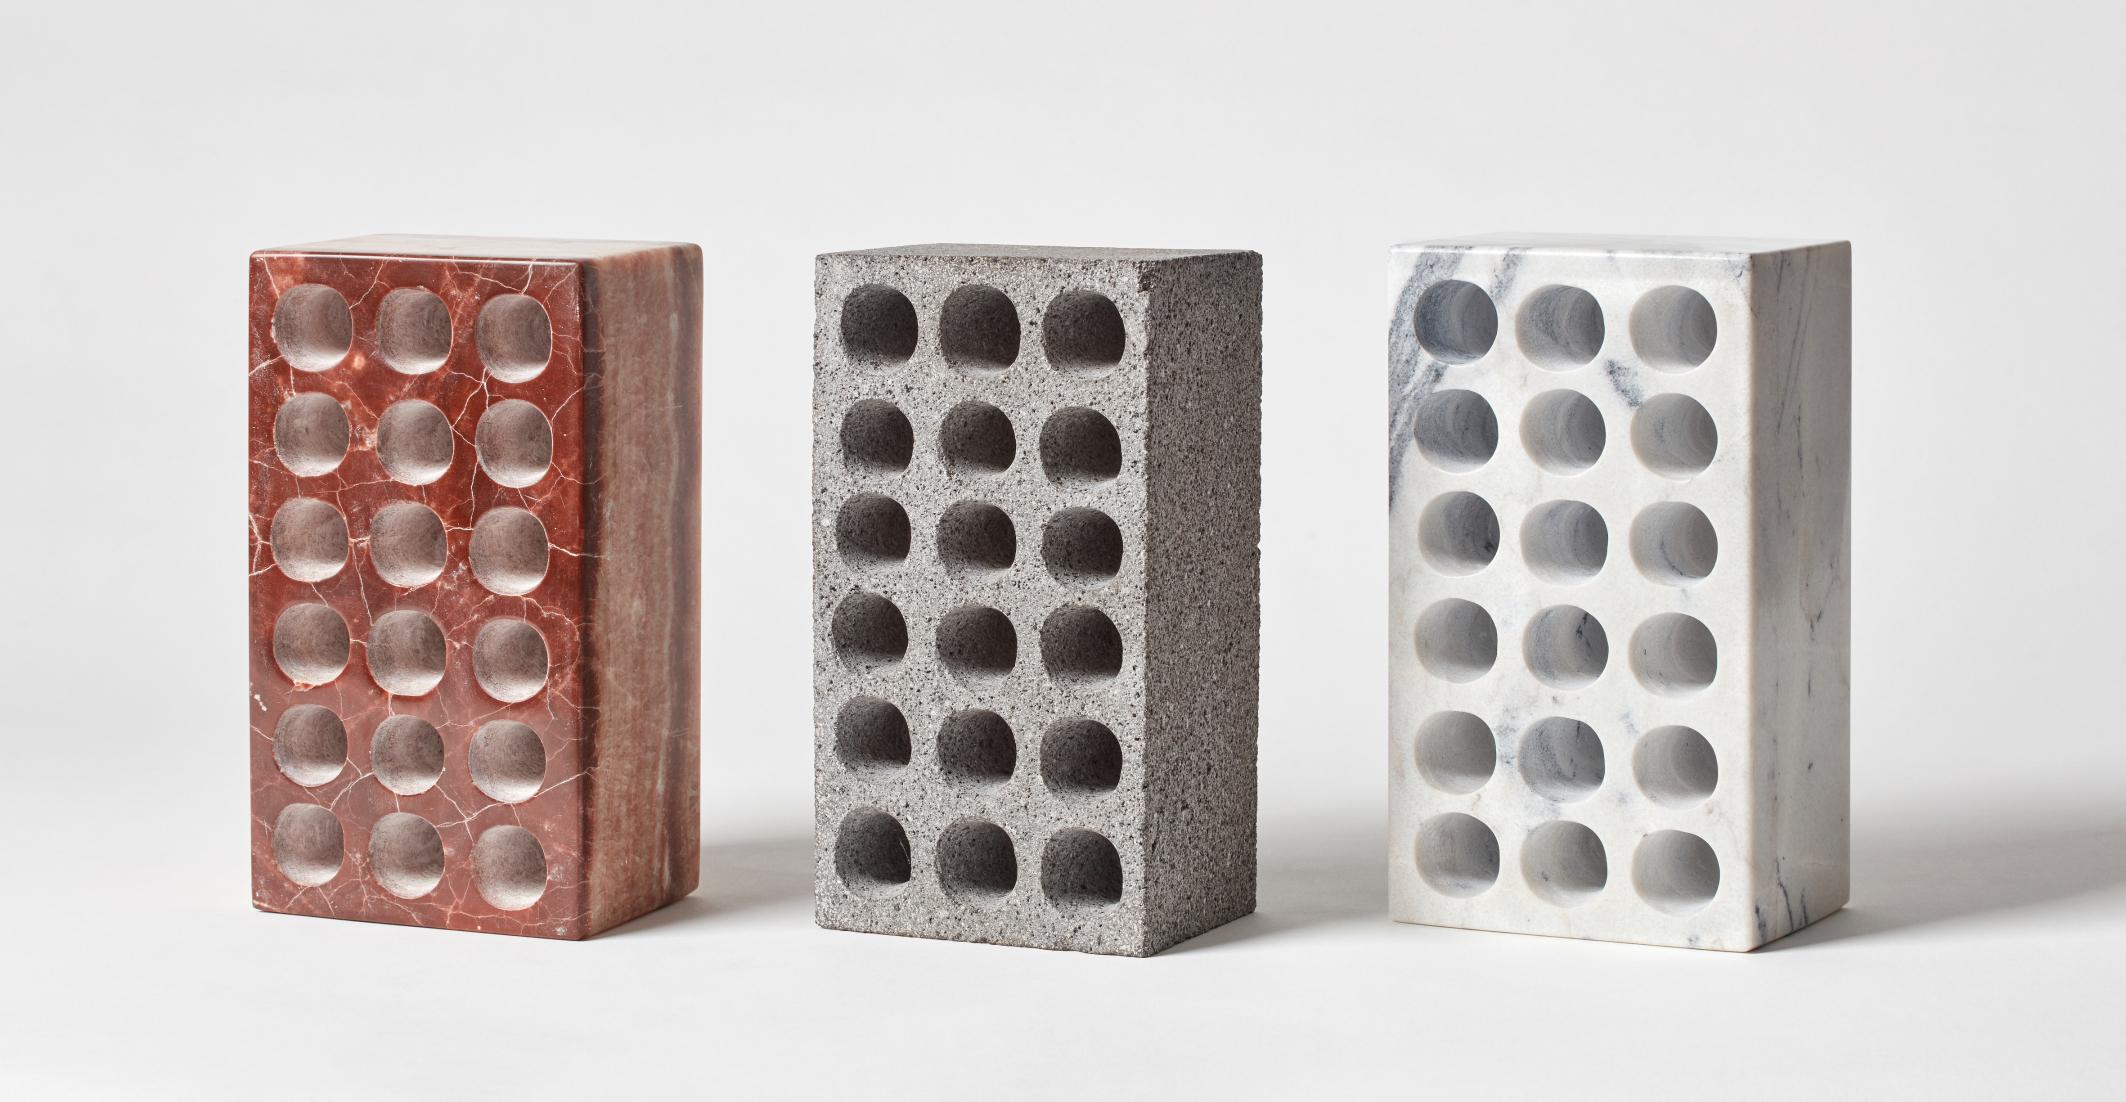 Set of 3 Bricks by Estudio Rafael Freyre
Dimensions: W 12.5 D 9 x H 23 cm 
Materials: Andes Stones
Also available: Other finishes available.

The brick is a generic constructive element that constitutes part of the urban imaginary. In Peru,